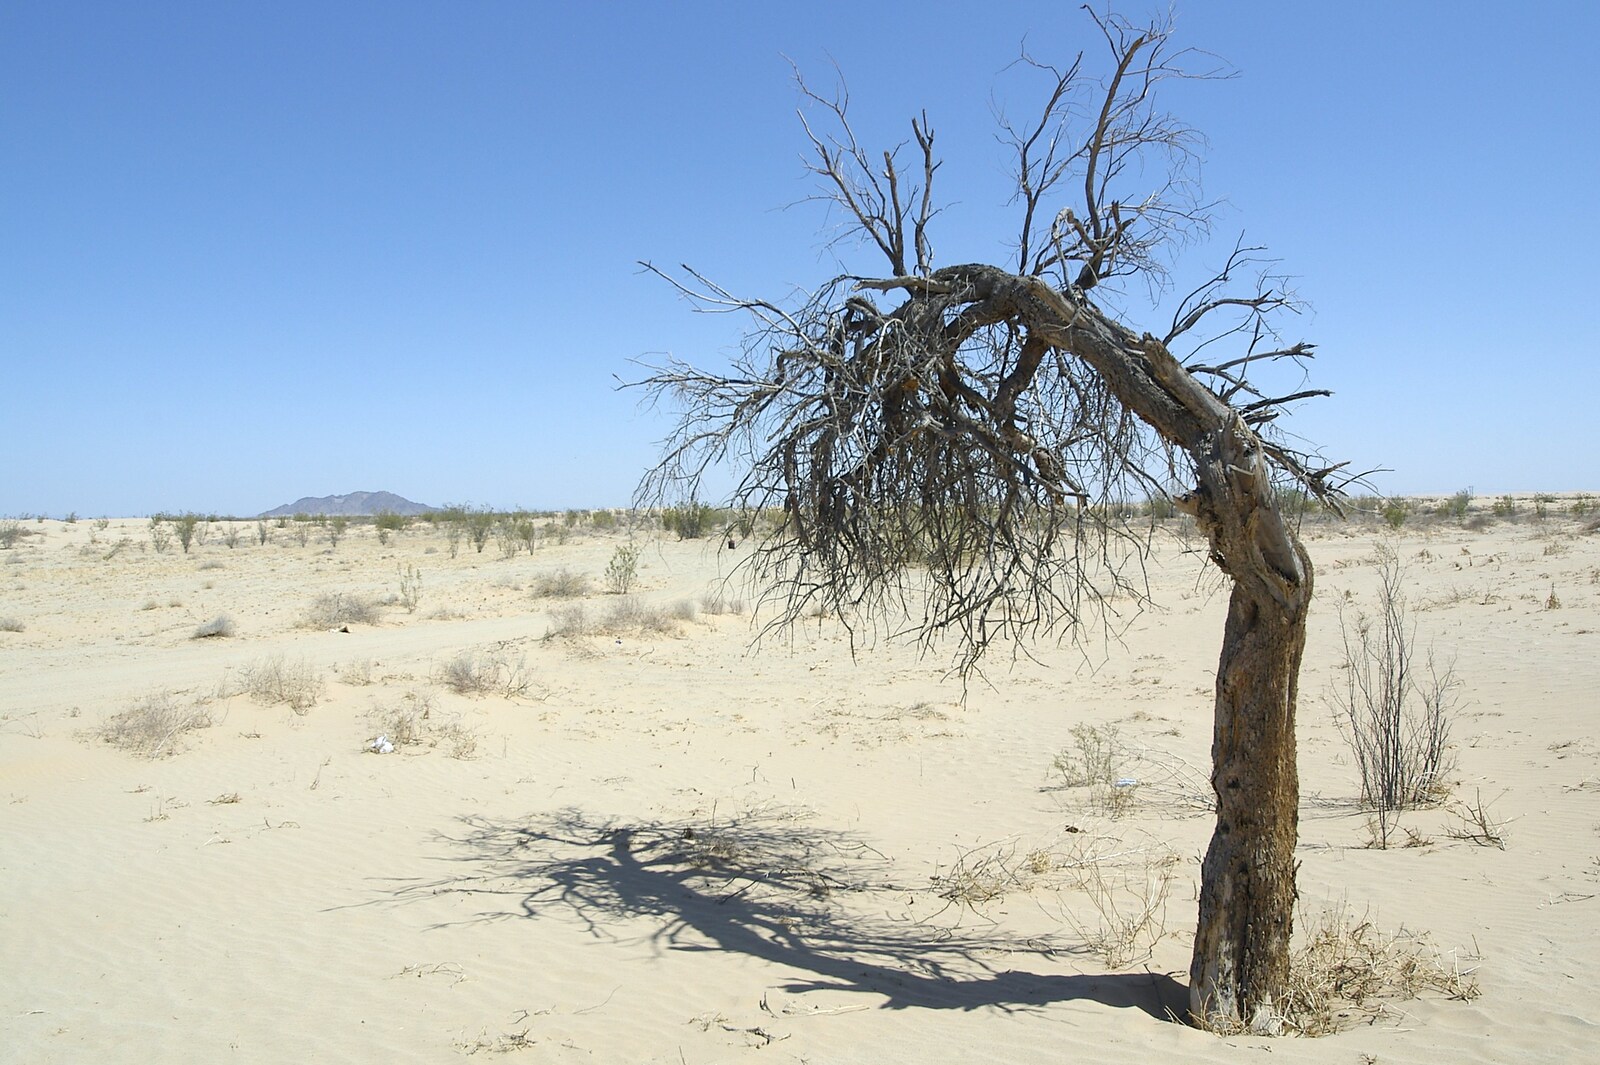 A gnarley tree, blown over from San Diego Seven: The Desert and the Dunes, Arizona and California, US - 22nd April